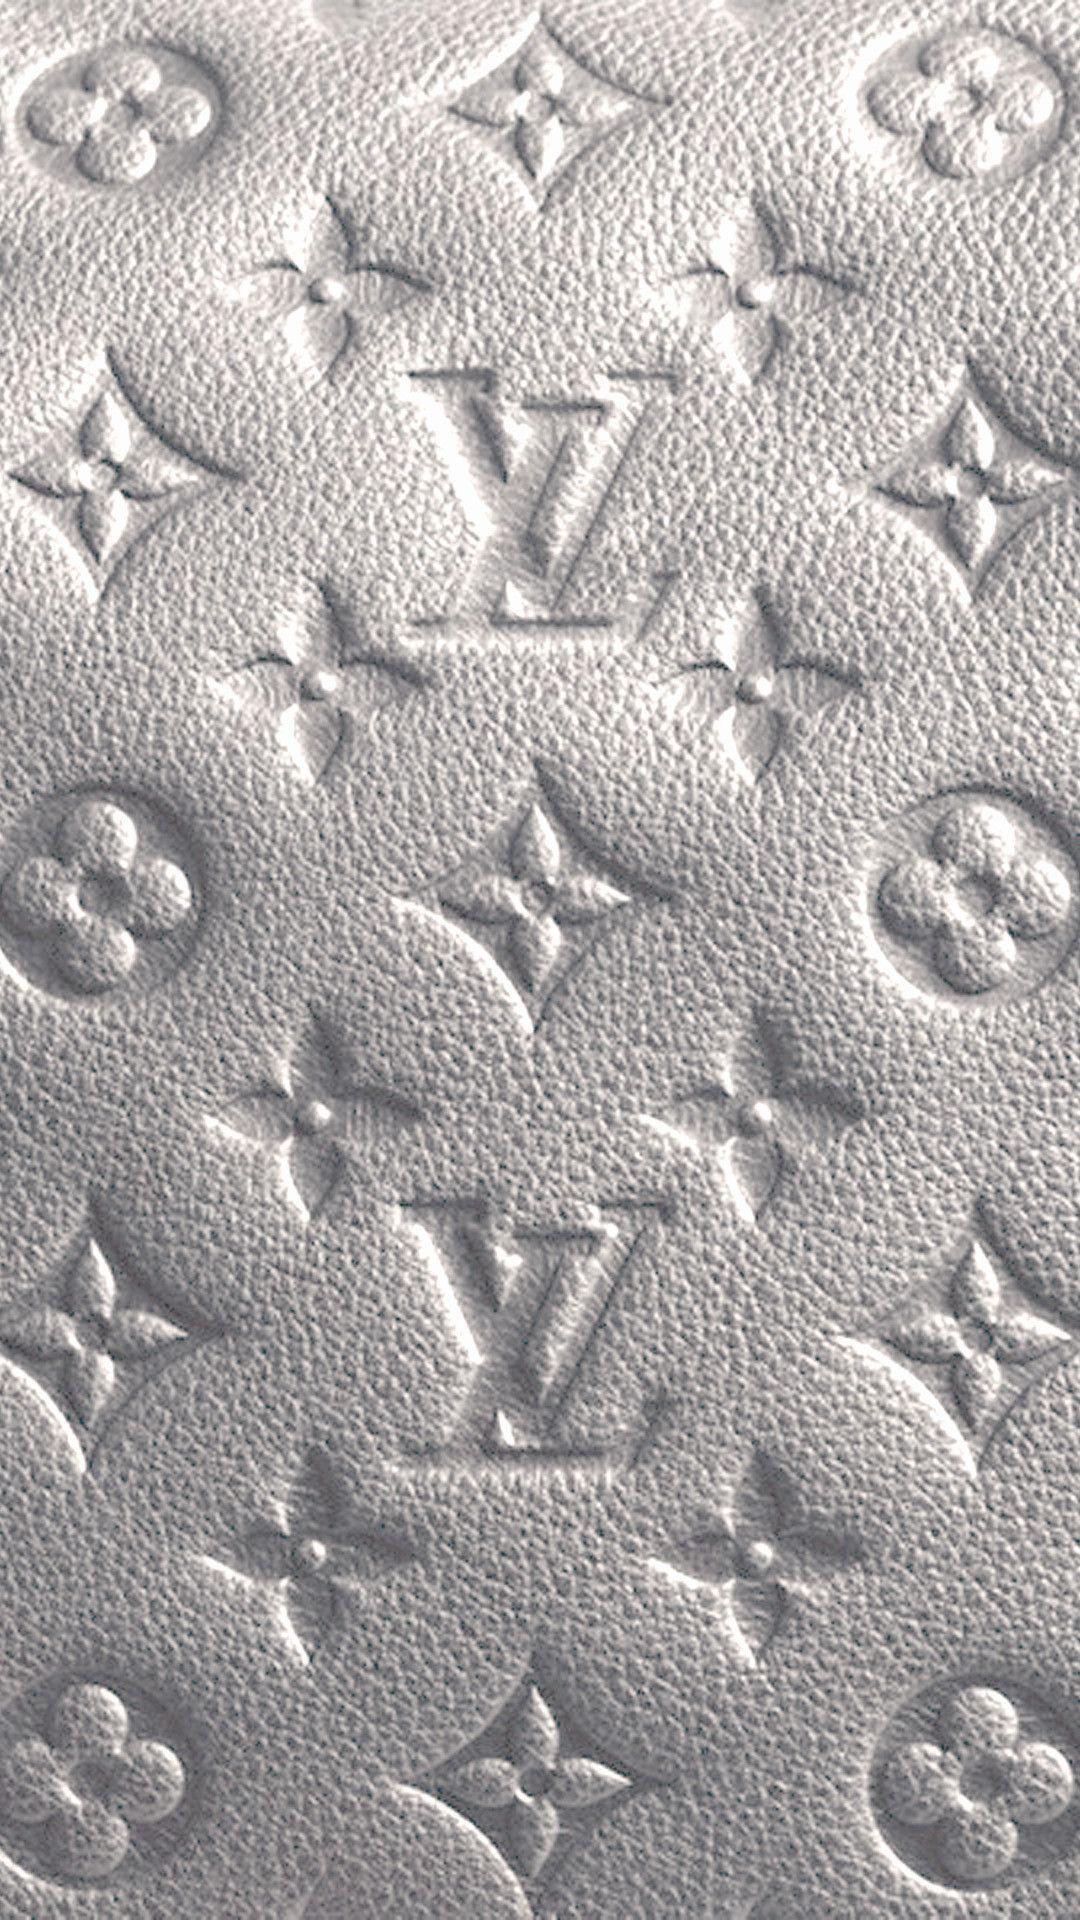 Louis Vuitton Black wallpaper by Amy11_official - Download on ZEDGE™